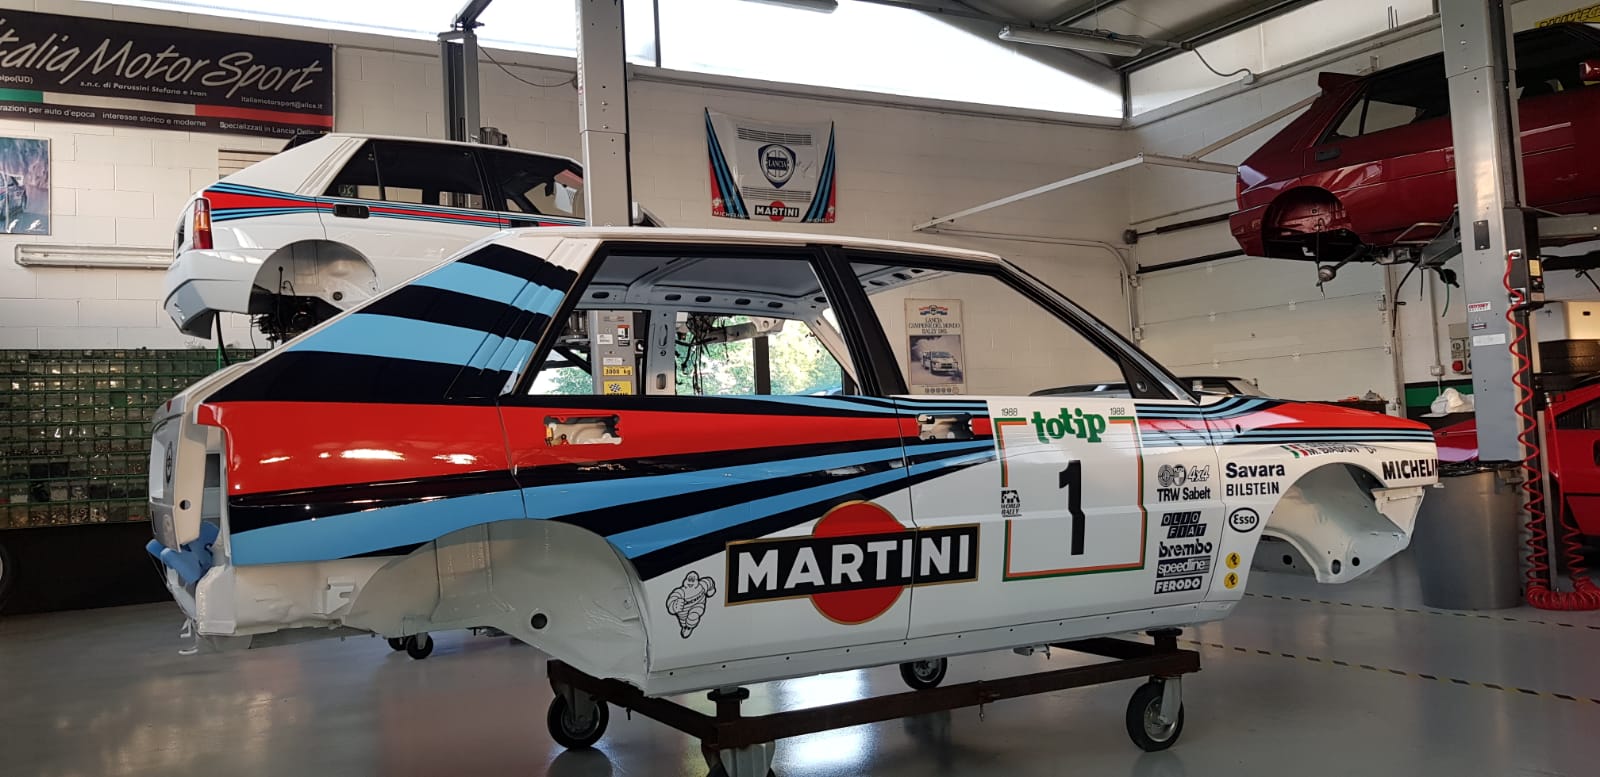 Lancia Delta HF Integrale 8v Martini Gr.A Painted Livery